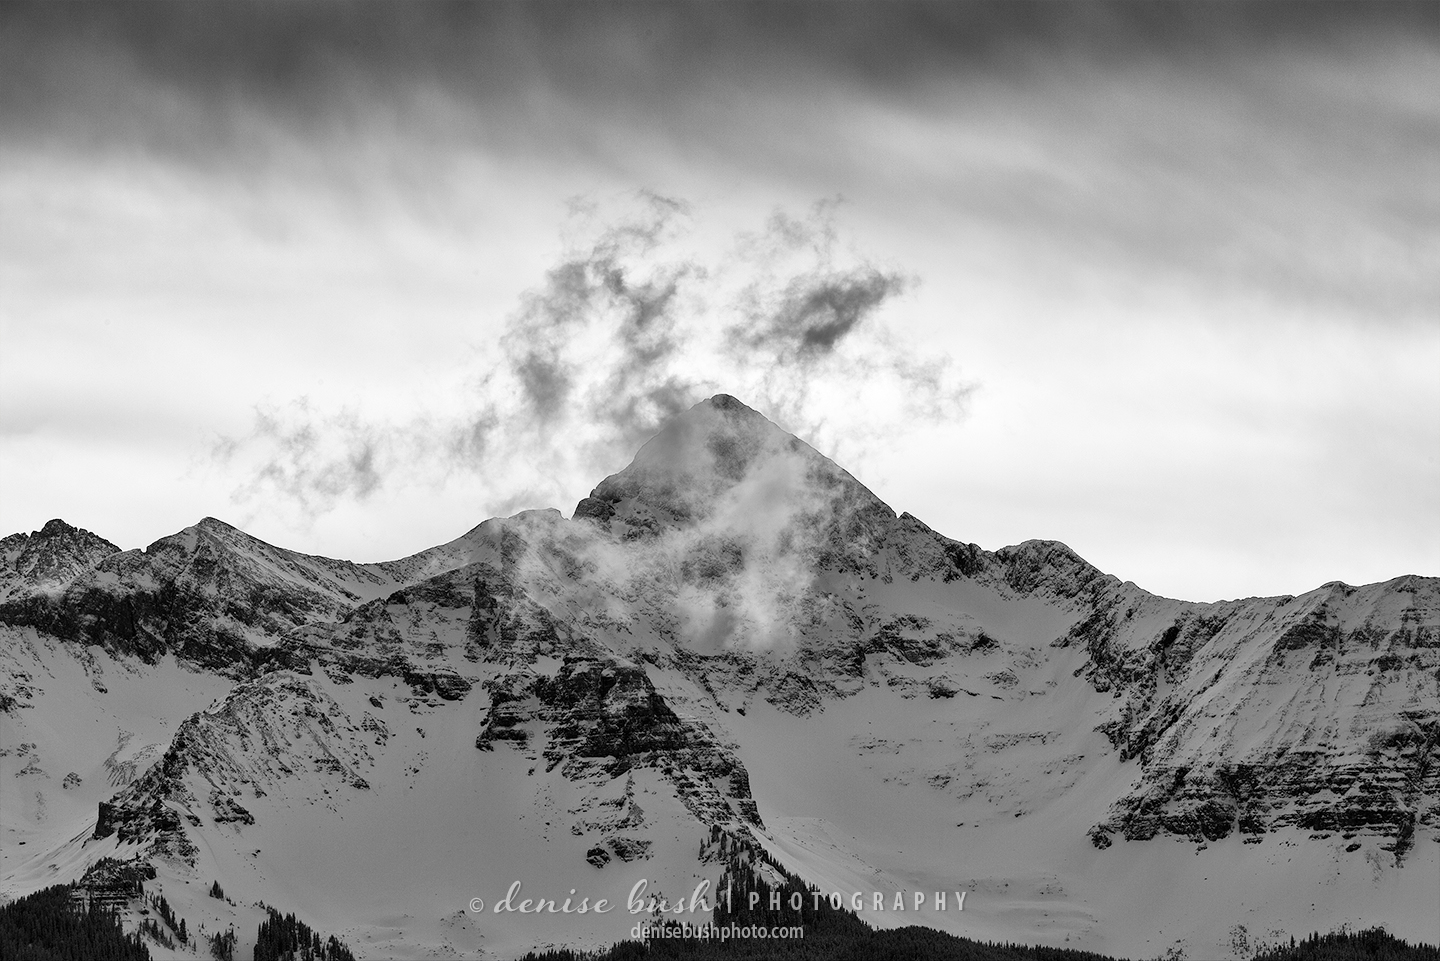 A cloud moves past Wilson Peak, near Telluride Colorado, creating a moody black and white image.